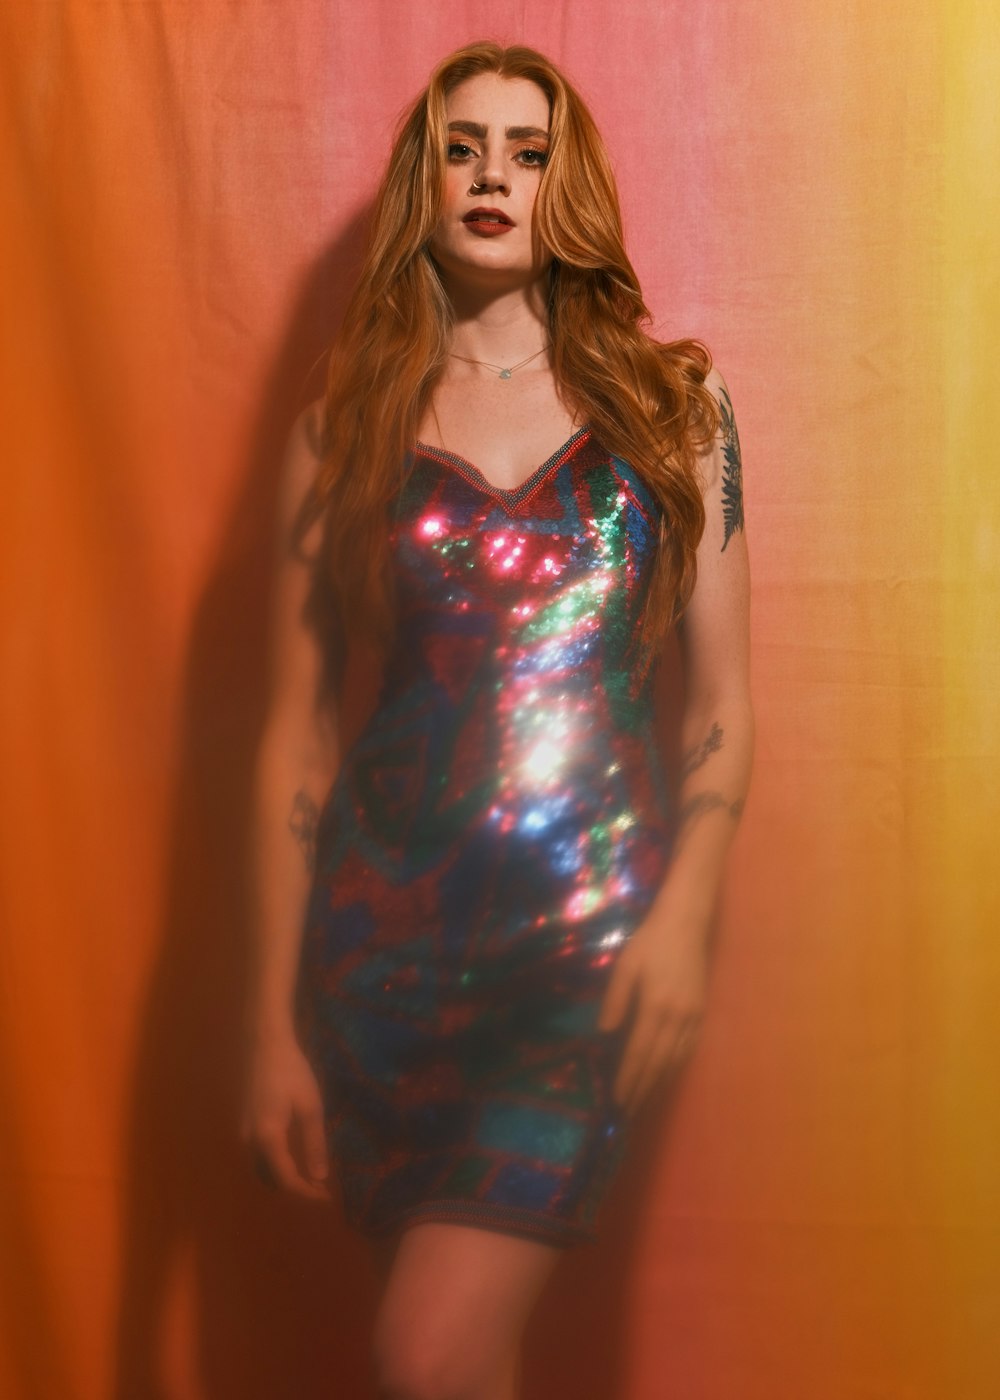 a woman with red hair wearing a shiny dress